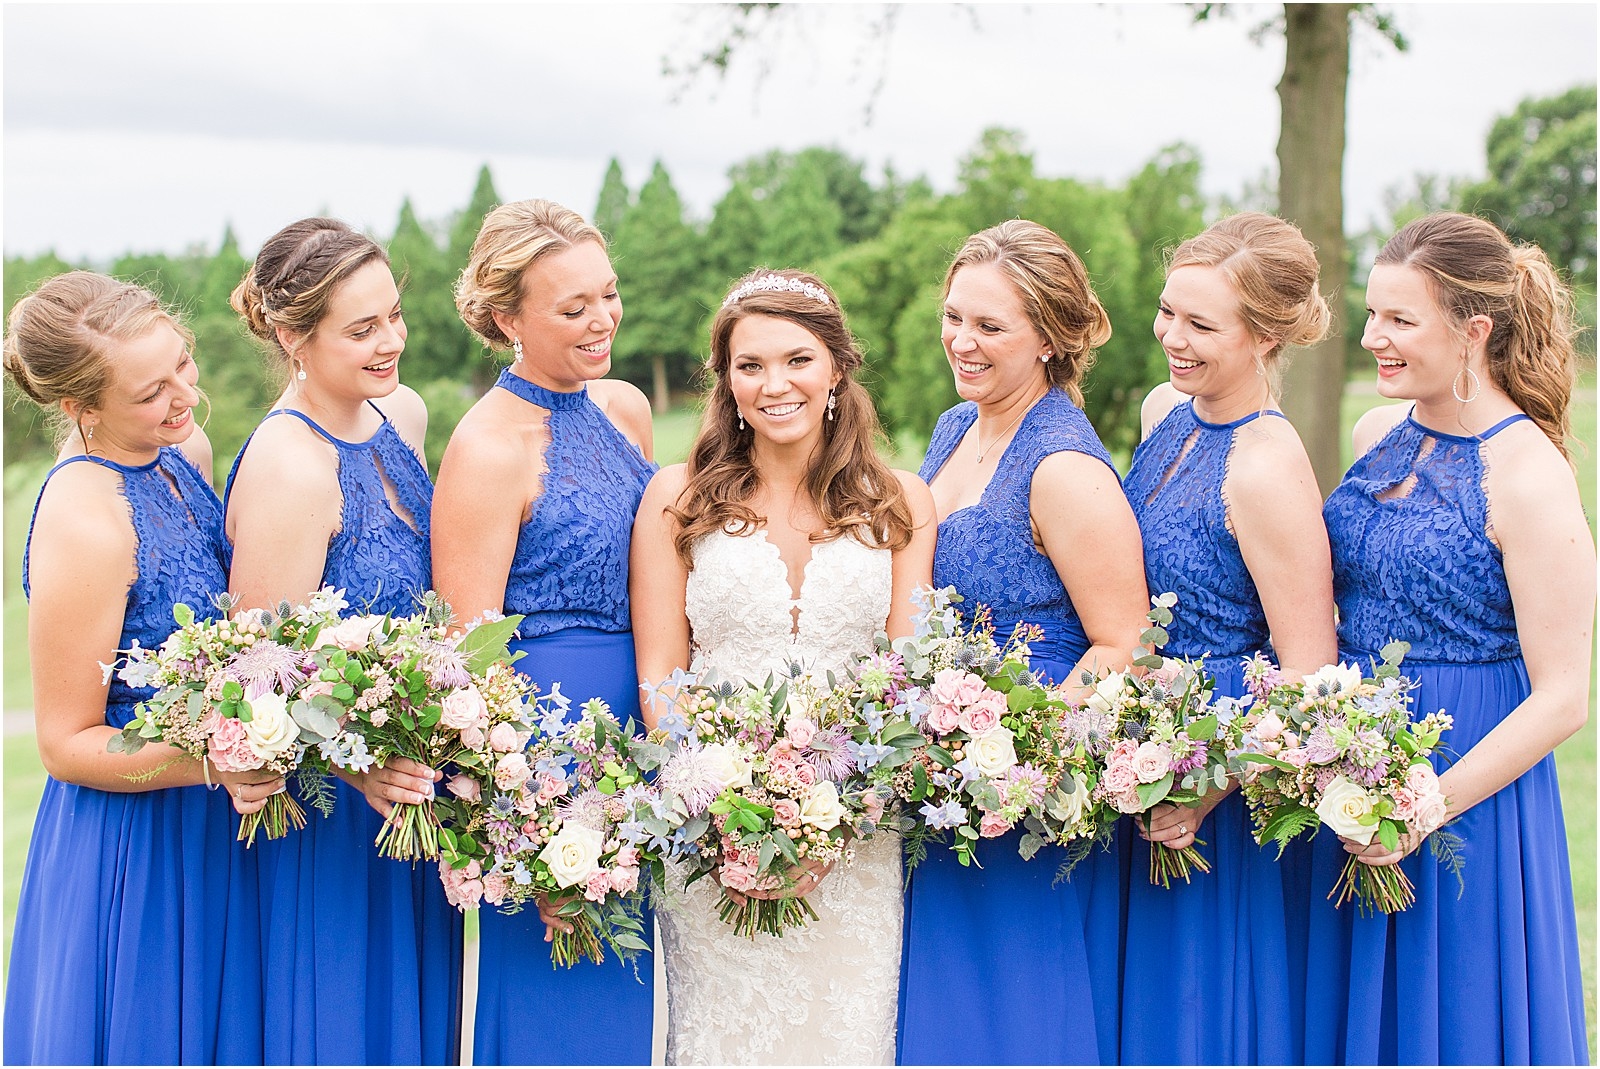 An Evansville County Club Wedding | Abby and Stratton 064.jpg